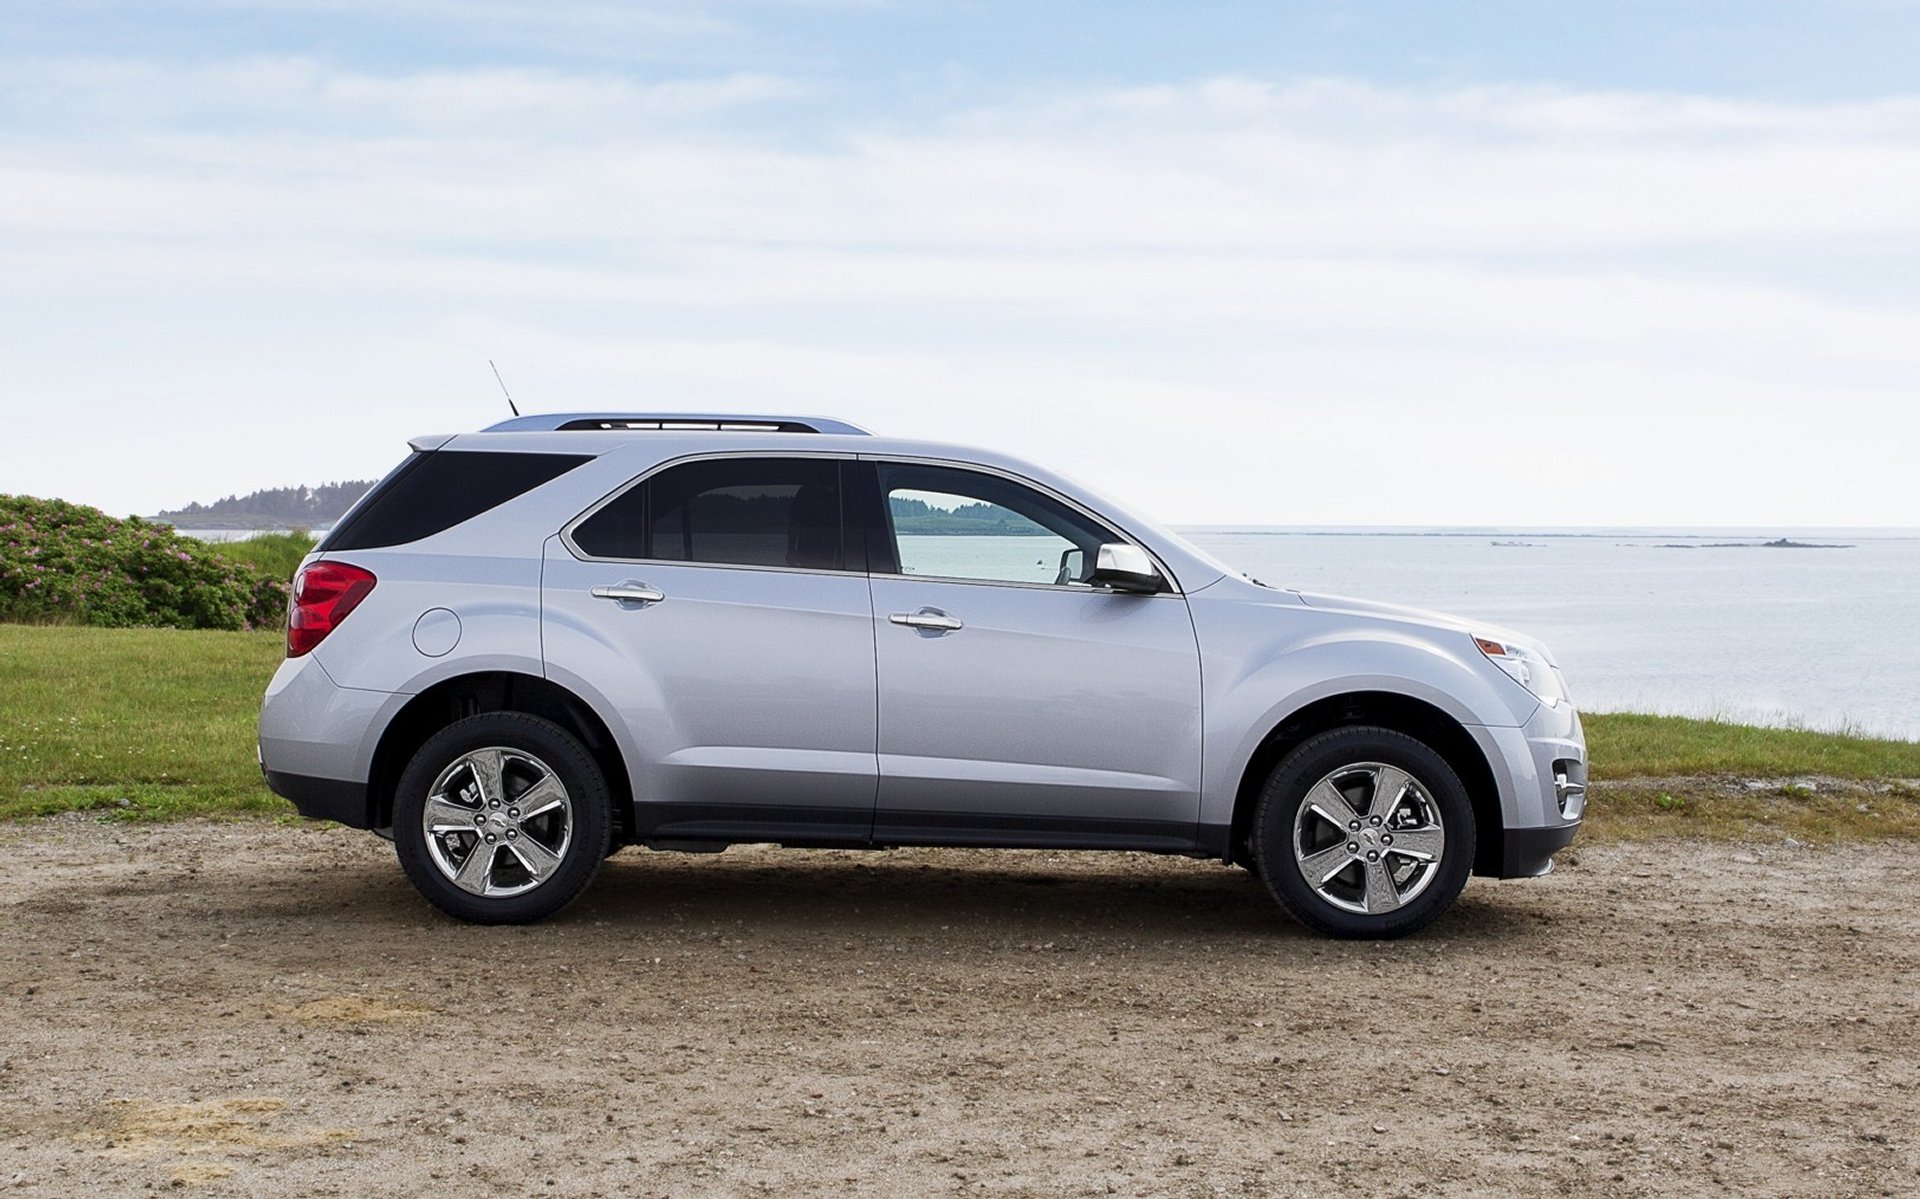 2015 Chevrolet Equinox Chevy Review Ratings Specs